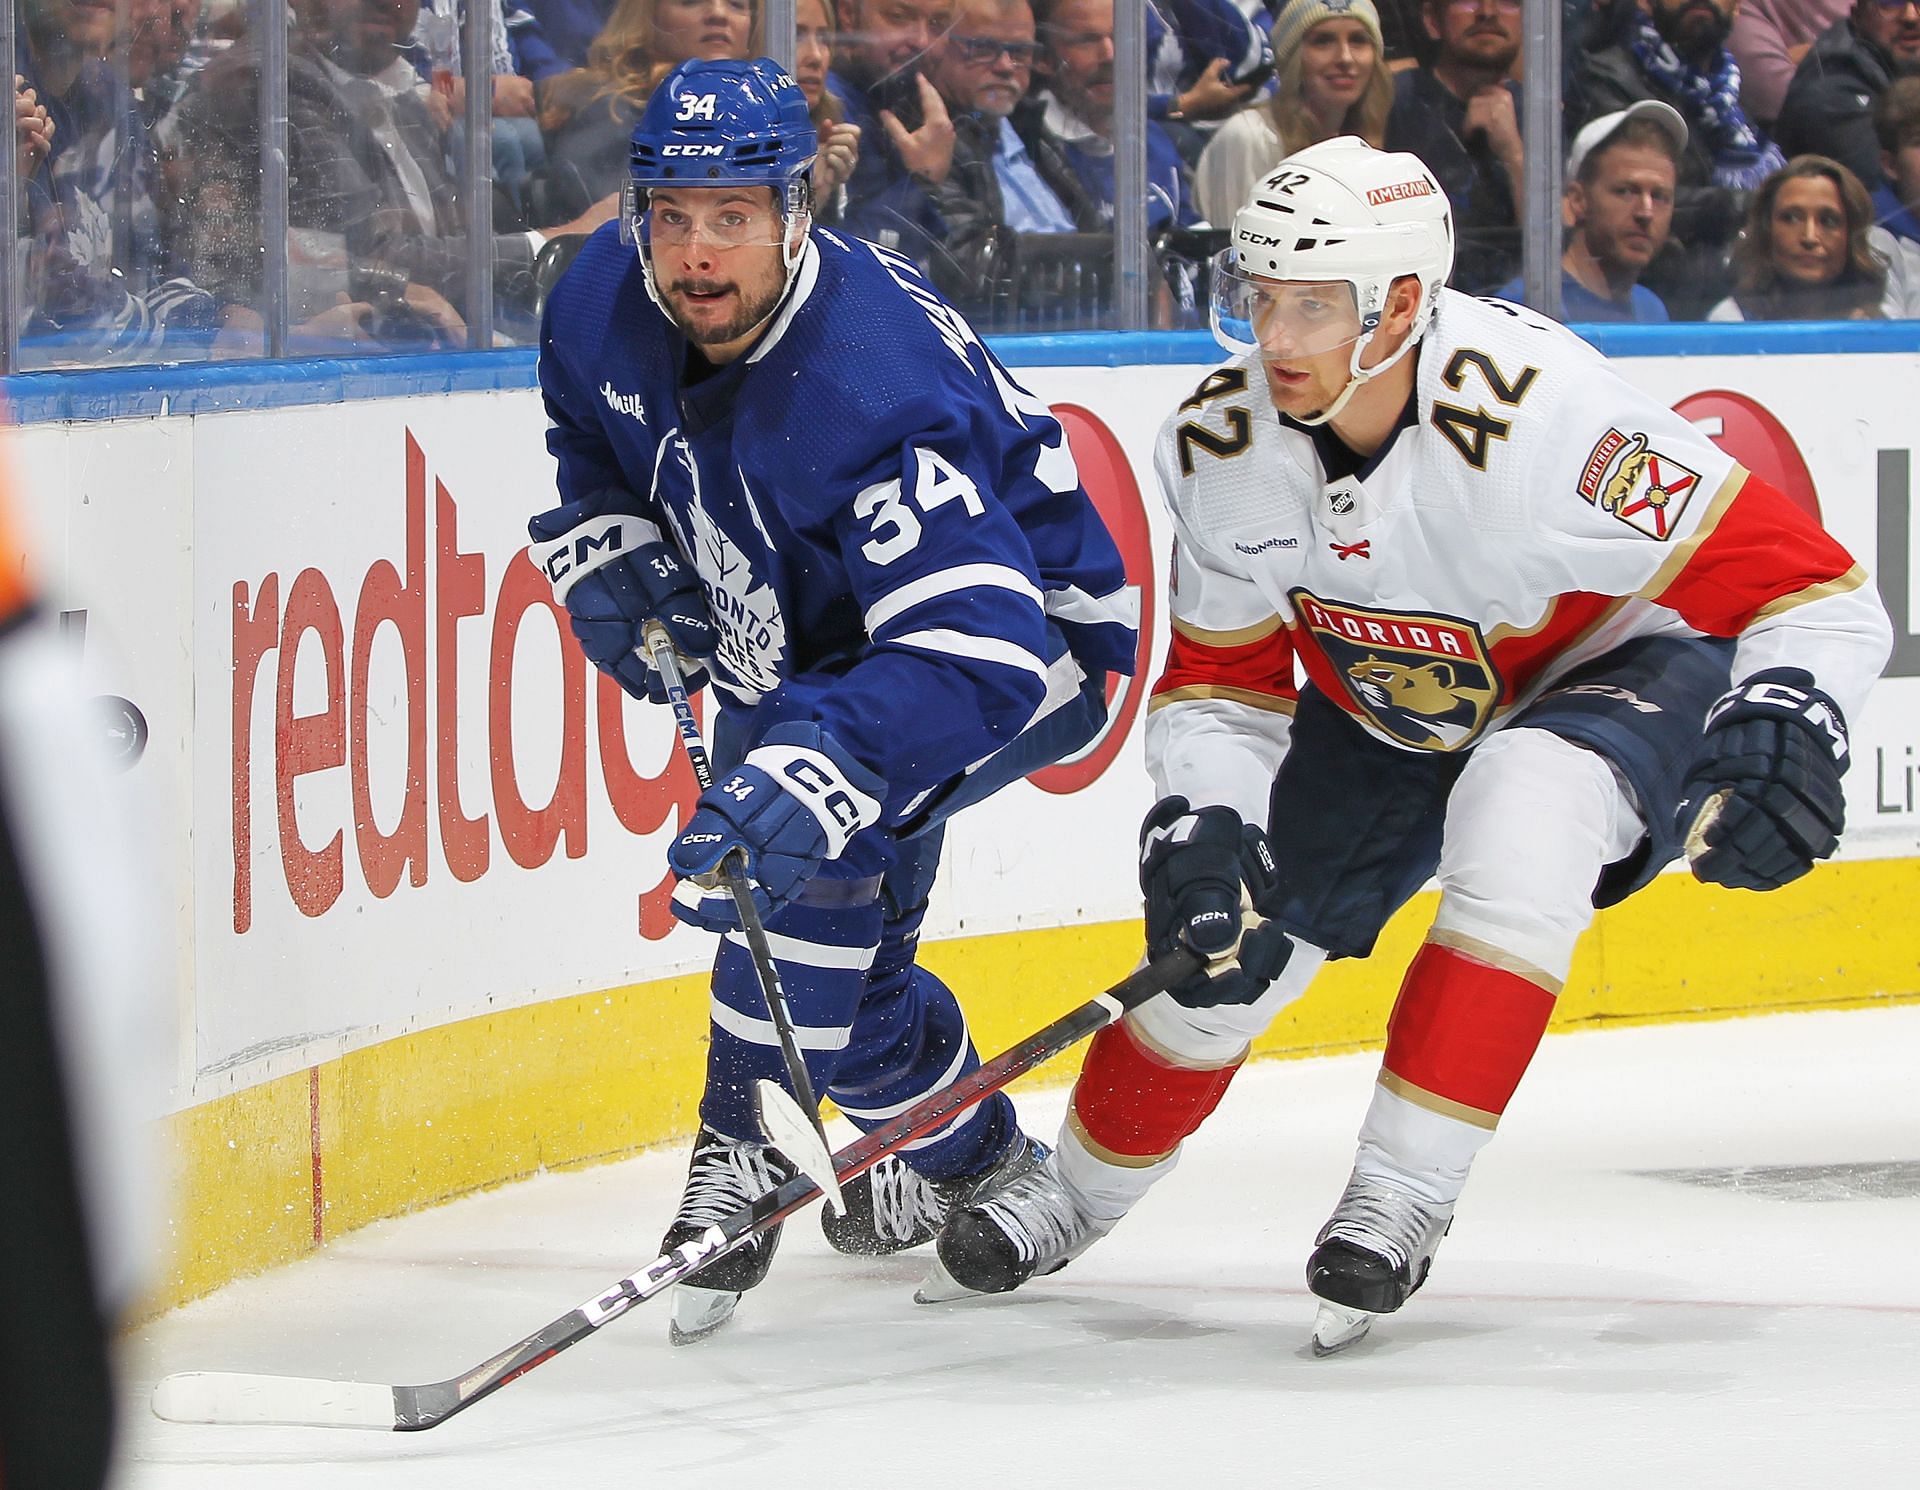 Toronto Maple Leafs vs Florida Panthers Game 4 How to Watch, TV Channel List, Live Stream details and more